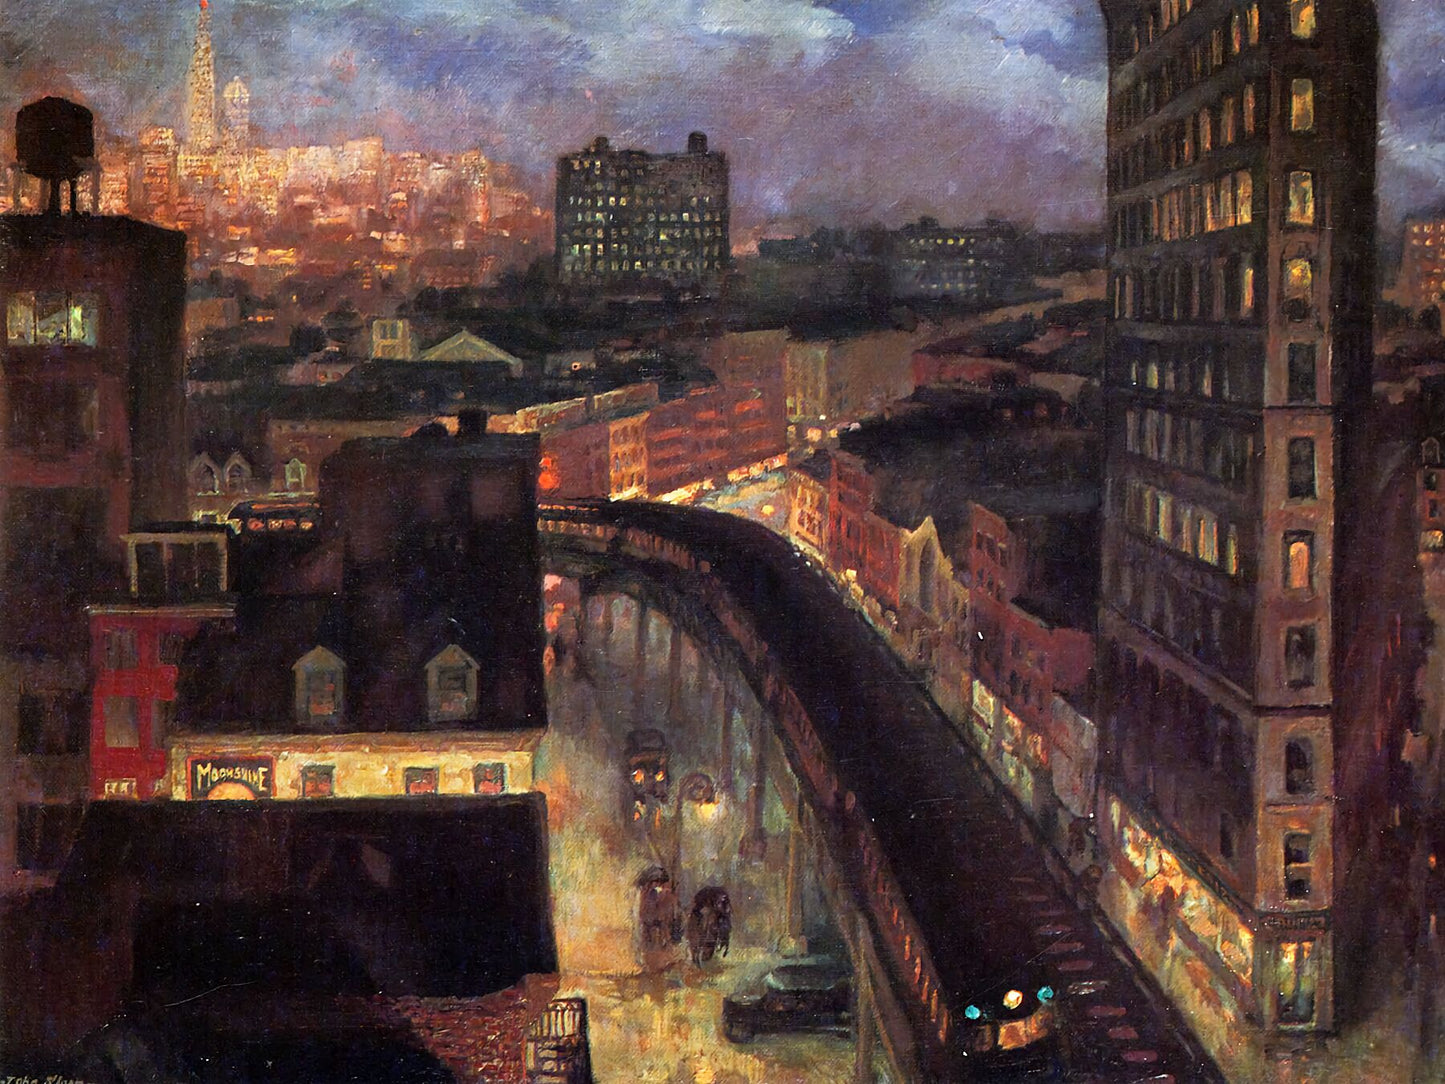 The City from Greenwich Village by John Sloane - 1922